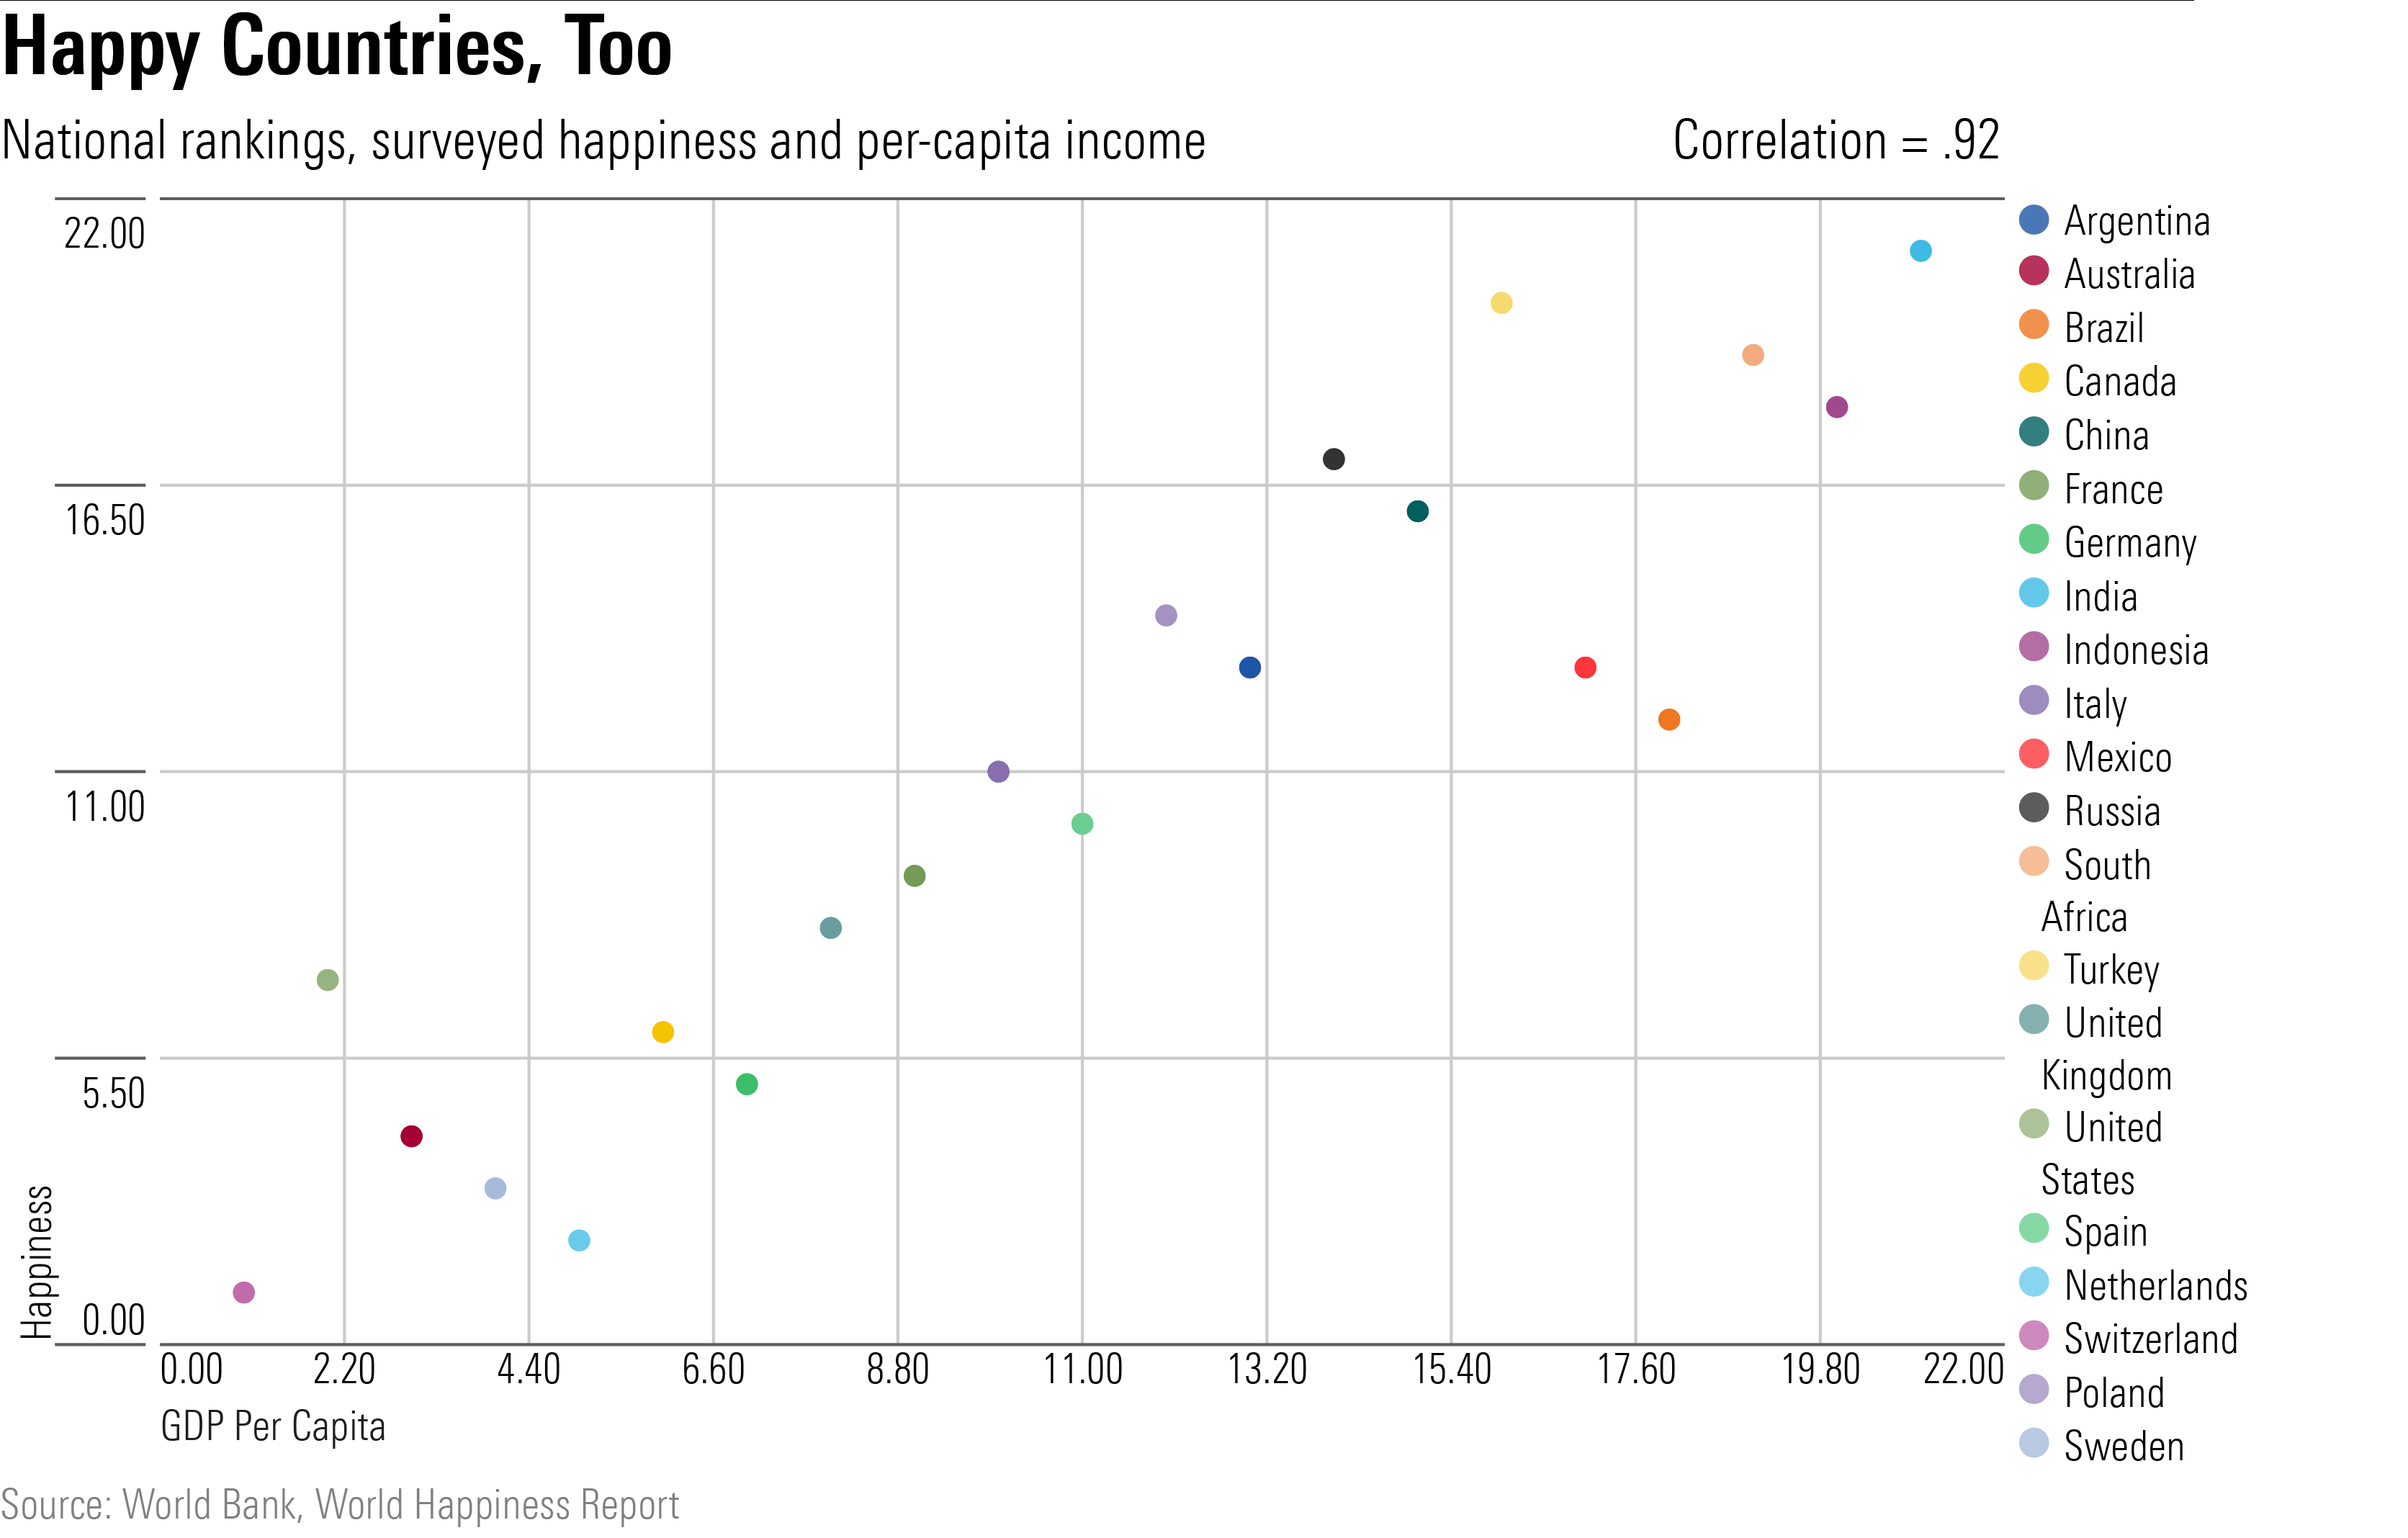 A scatterplot chart that shows a 0.92 correlation between how 21 countries rank on a surveyed happiness and how they rank on per-capita income.